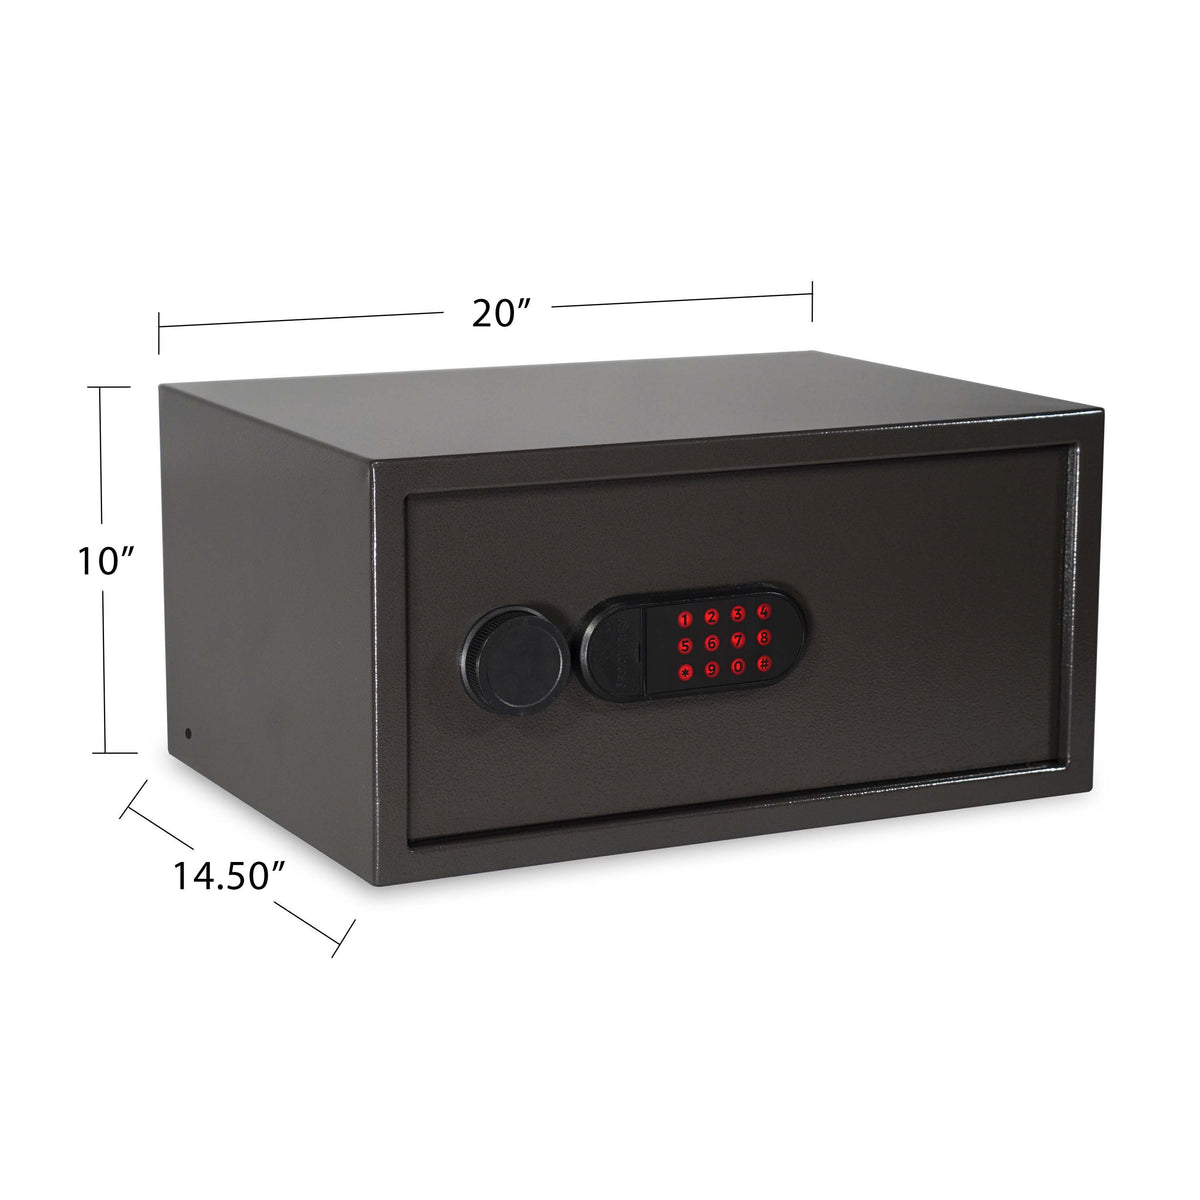 Sports Afield SA-PVLP-03 Home and Office Security Safe Dimensions